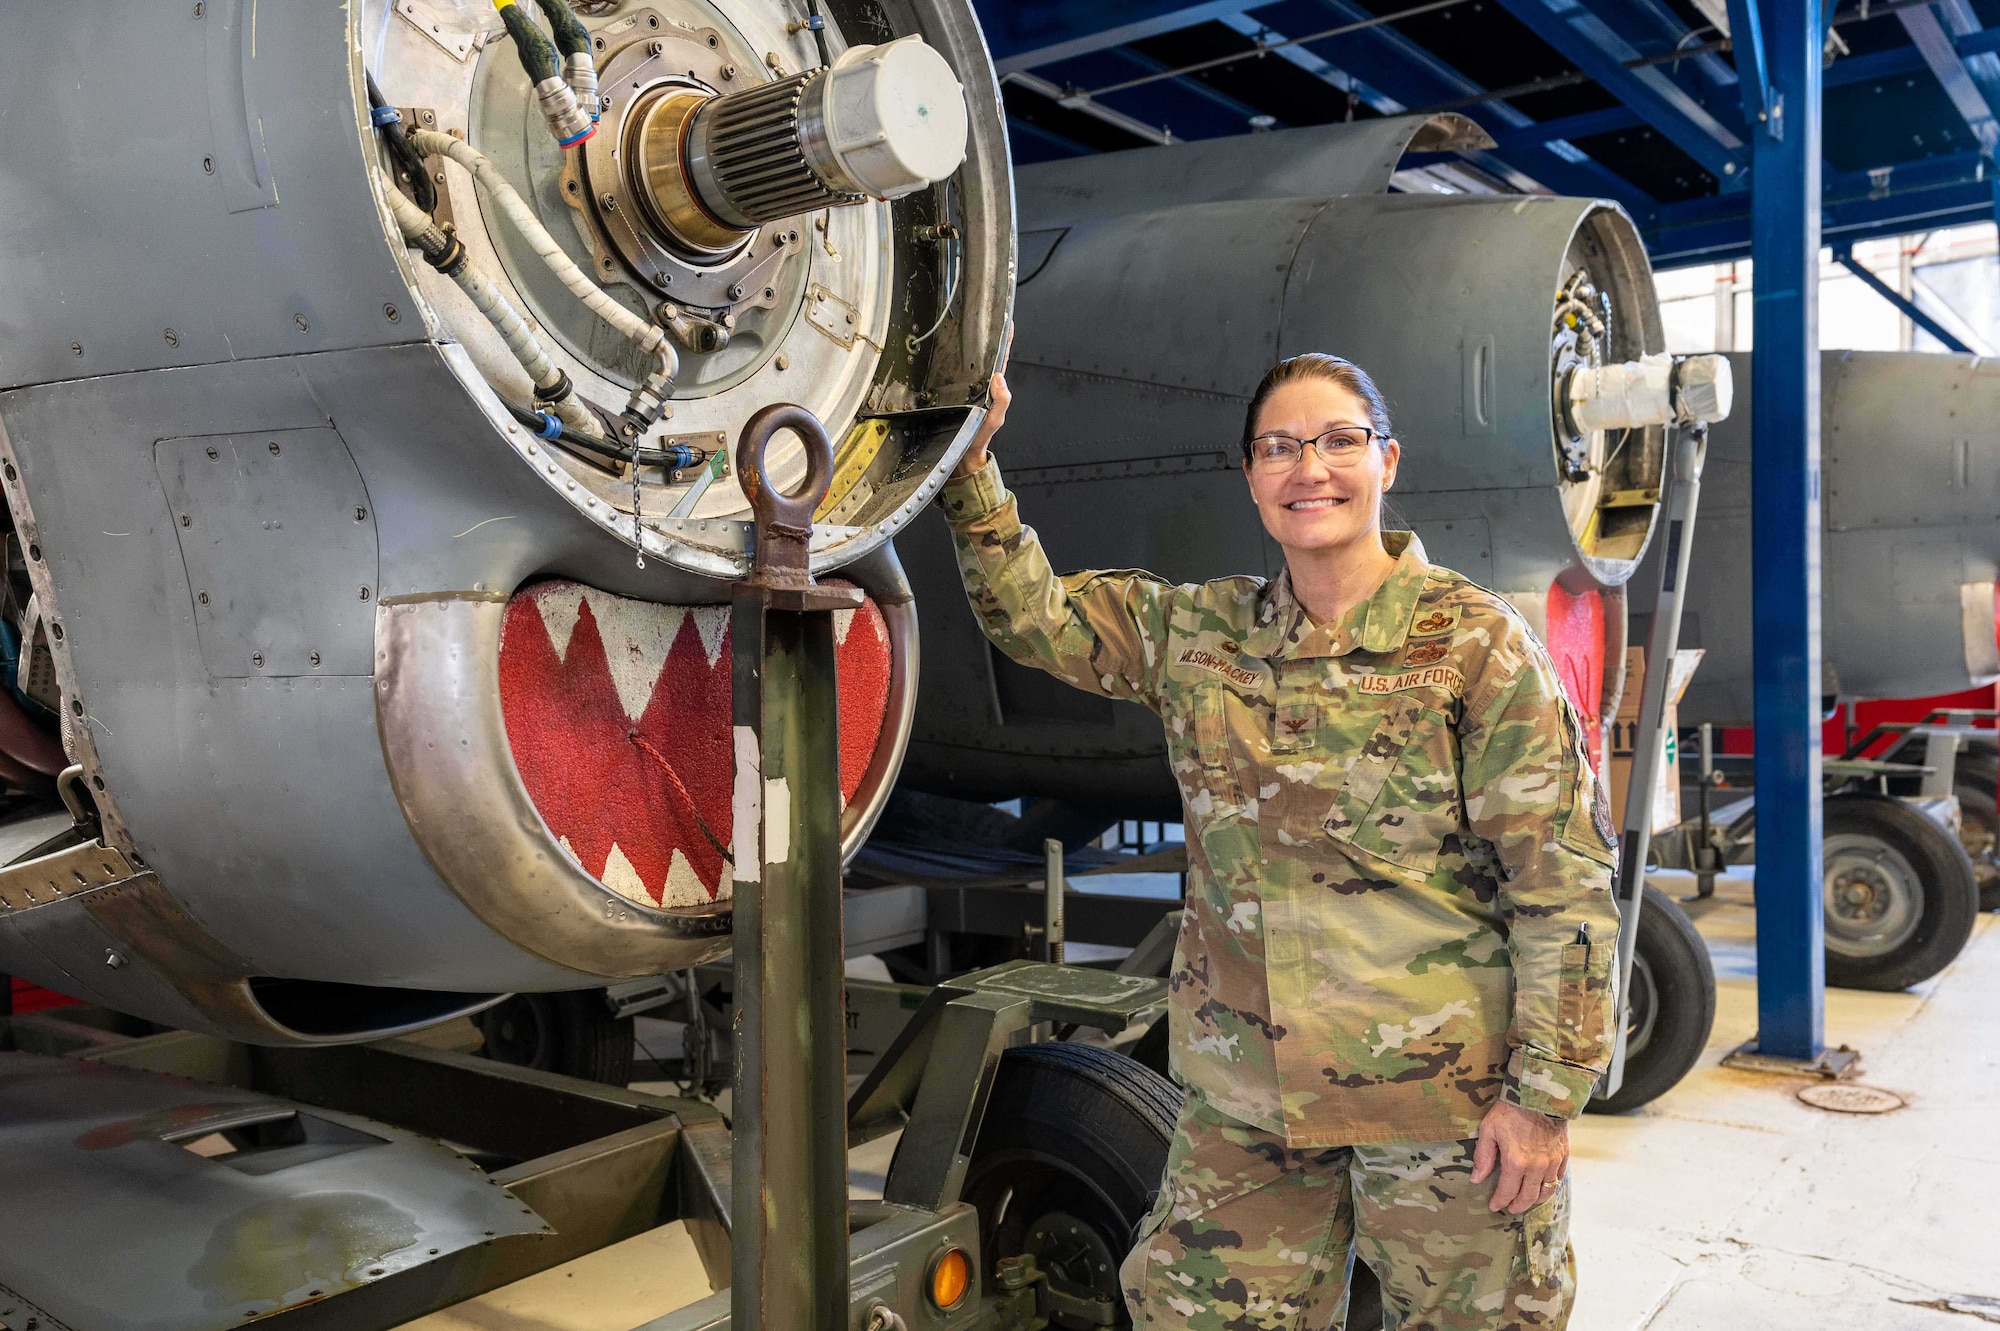 Colonel Gia Wilson-Mackey, 934th Maintenance Group Commander, poses in front of equipment at the engine shop at the Minneapolis-St. Paul Air Reserve Station, Feb. 25, 2023. Wilson-Mackey will officially assume command during the March UTA as the first female 934 MXG commander. (U.S. Air Force photo by Master Sgt. Trevor Saylor)